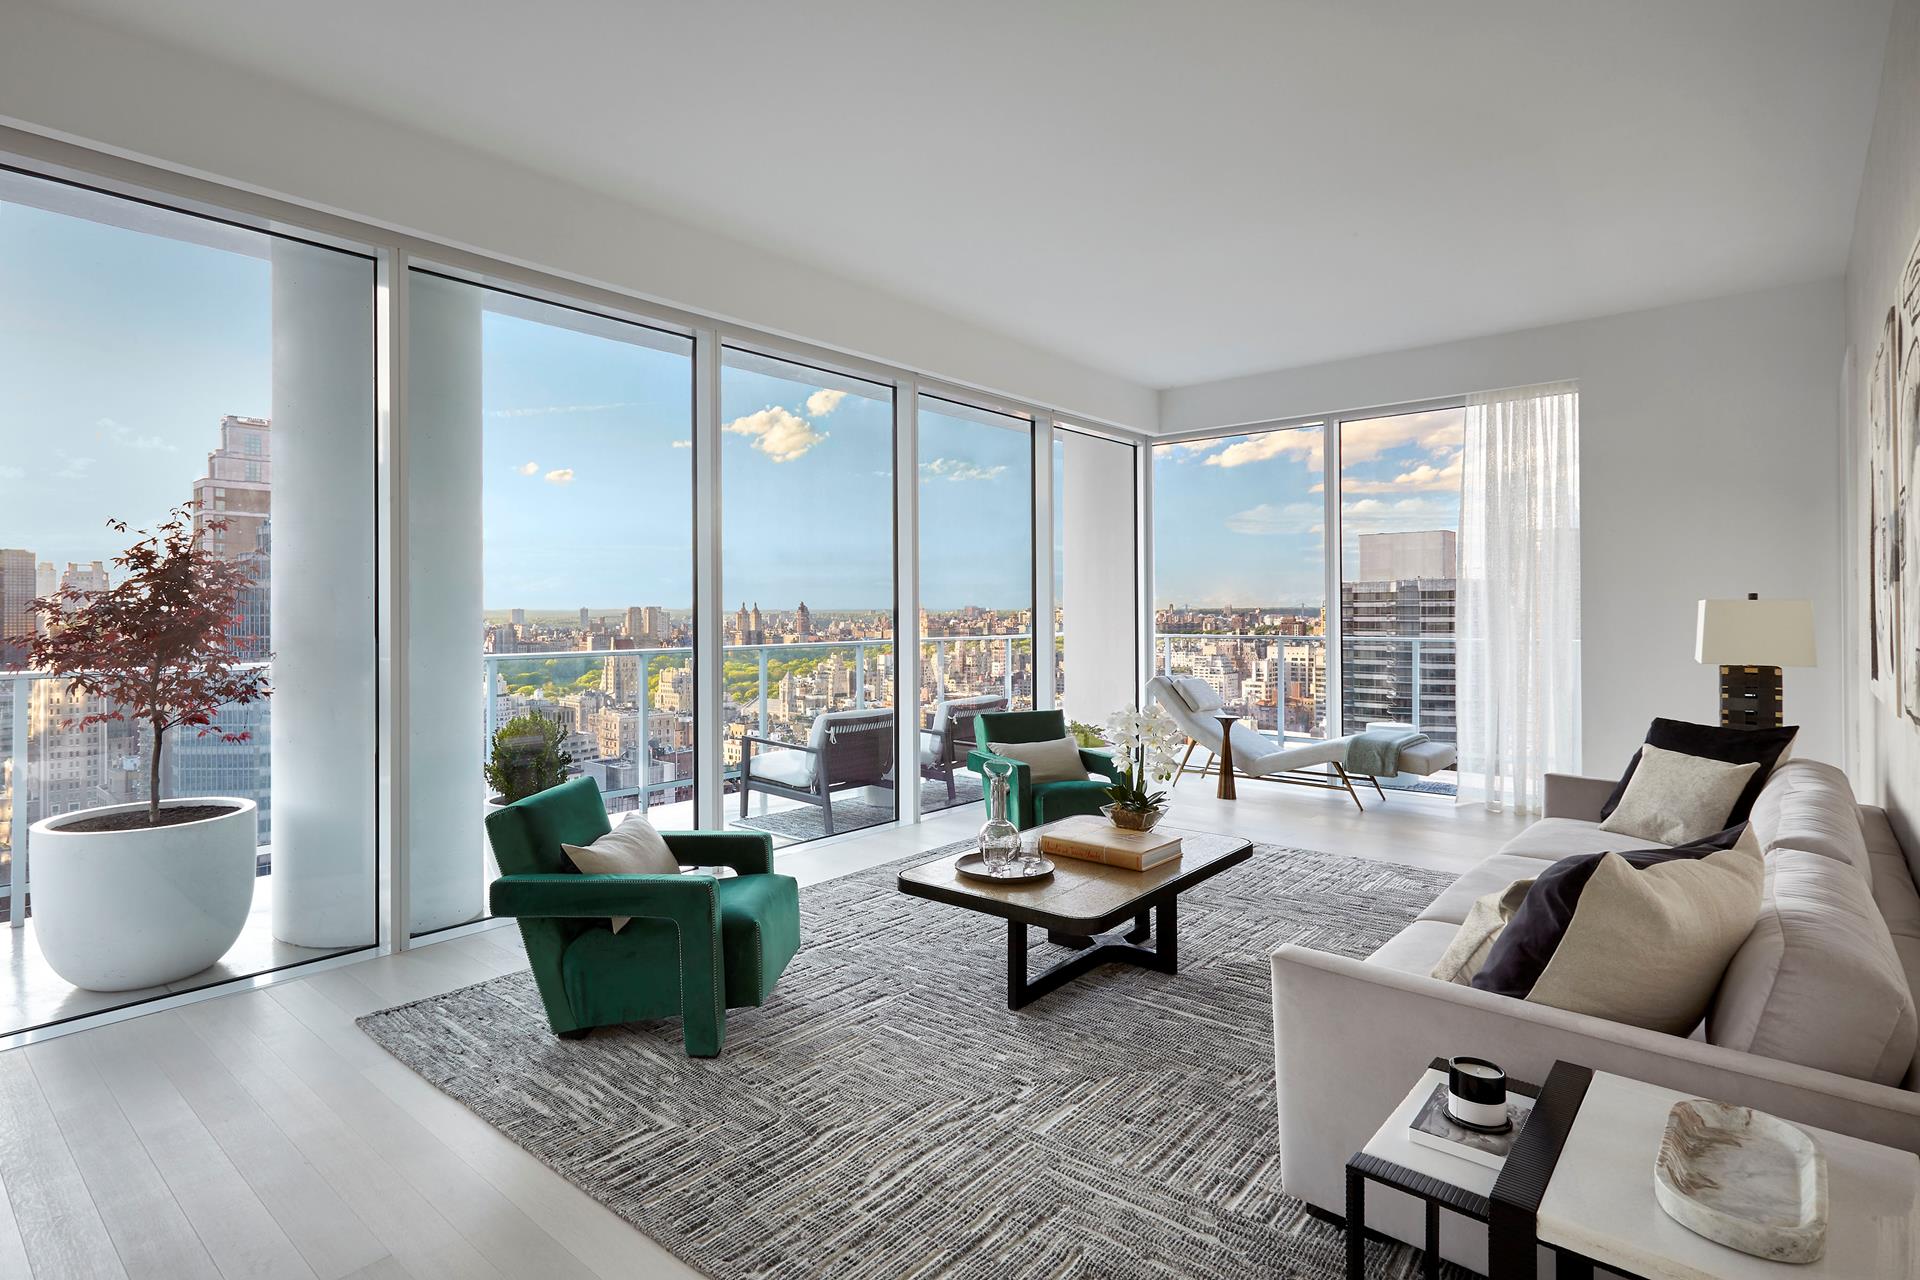 200 East 59th Street 23E, Sutton, Midtown East, NYC - 2 Bedrooms  
2.5 Bathrooms  
4 Rooms - 